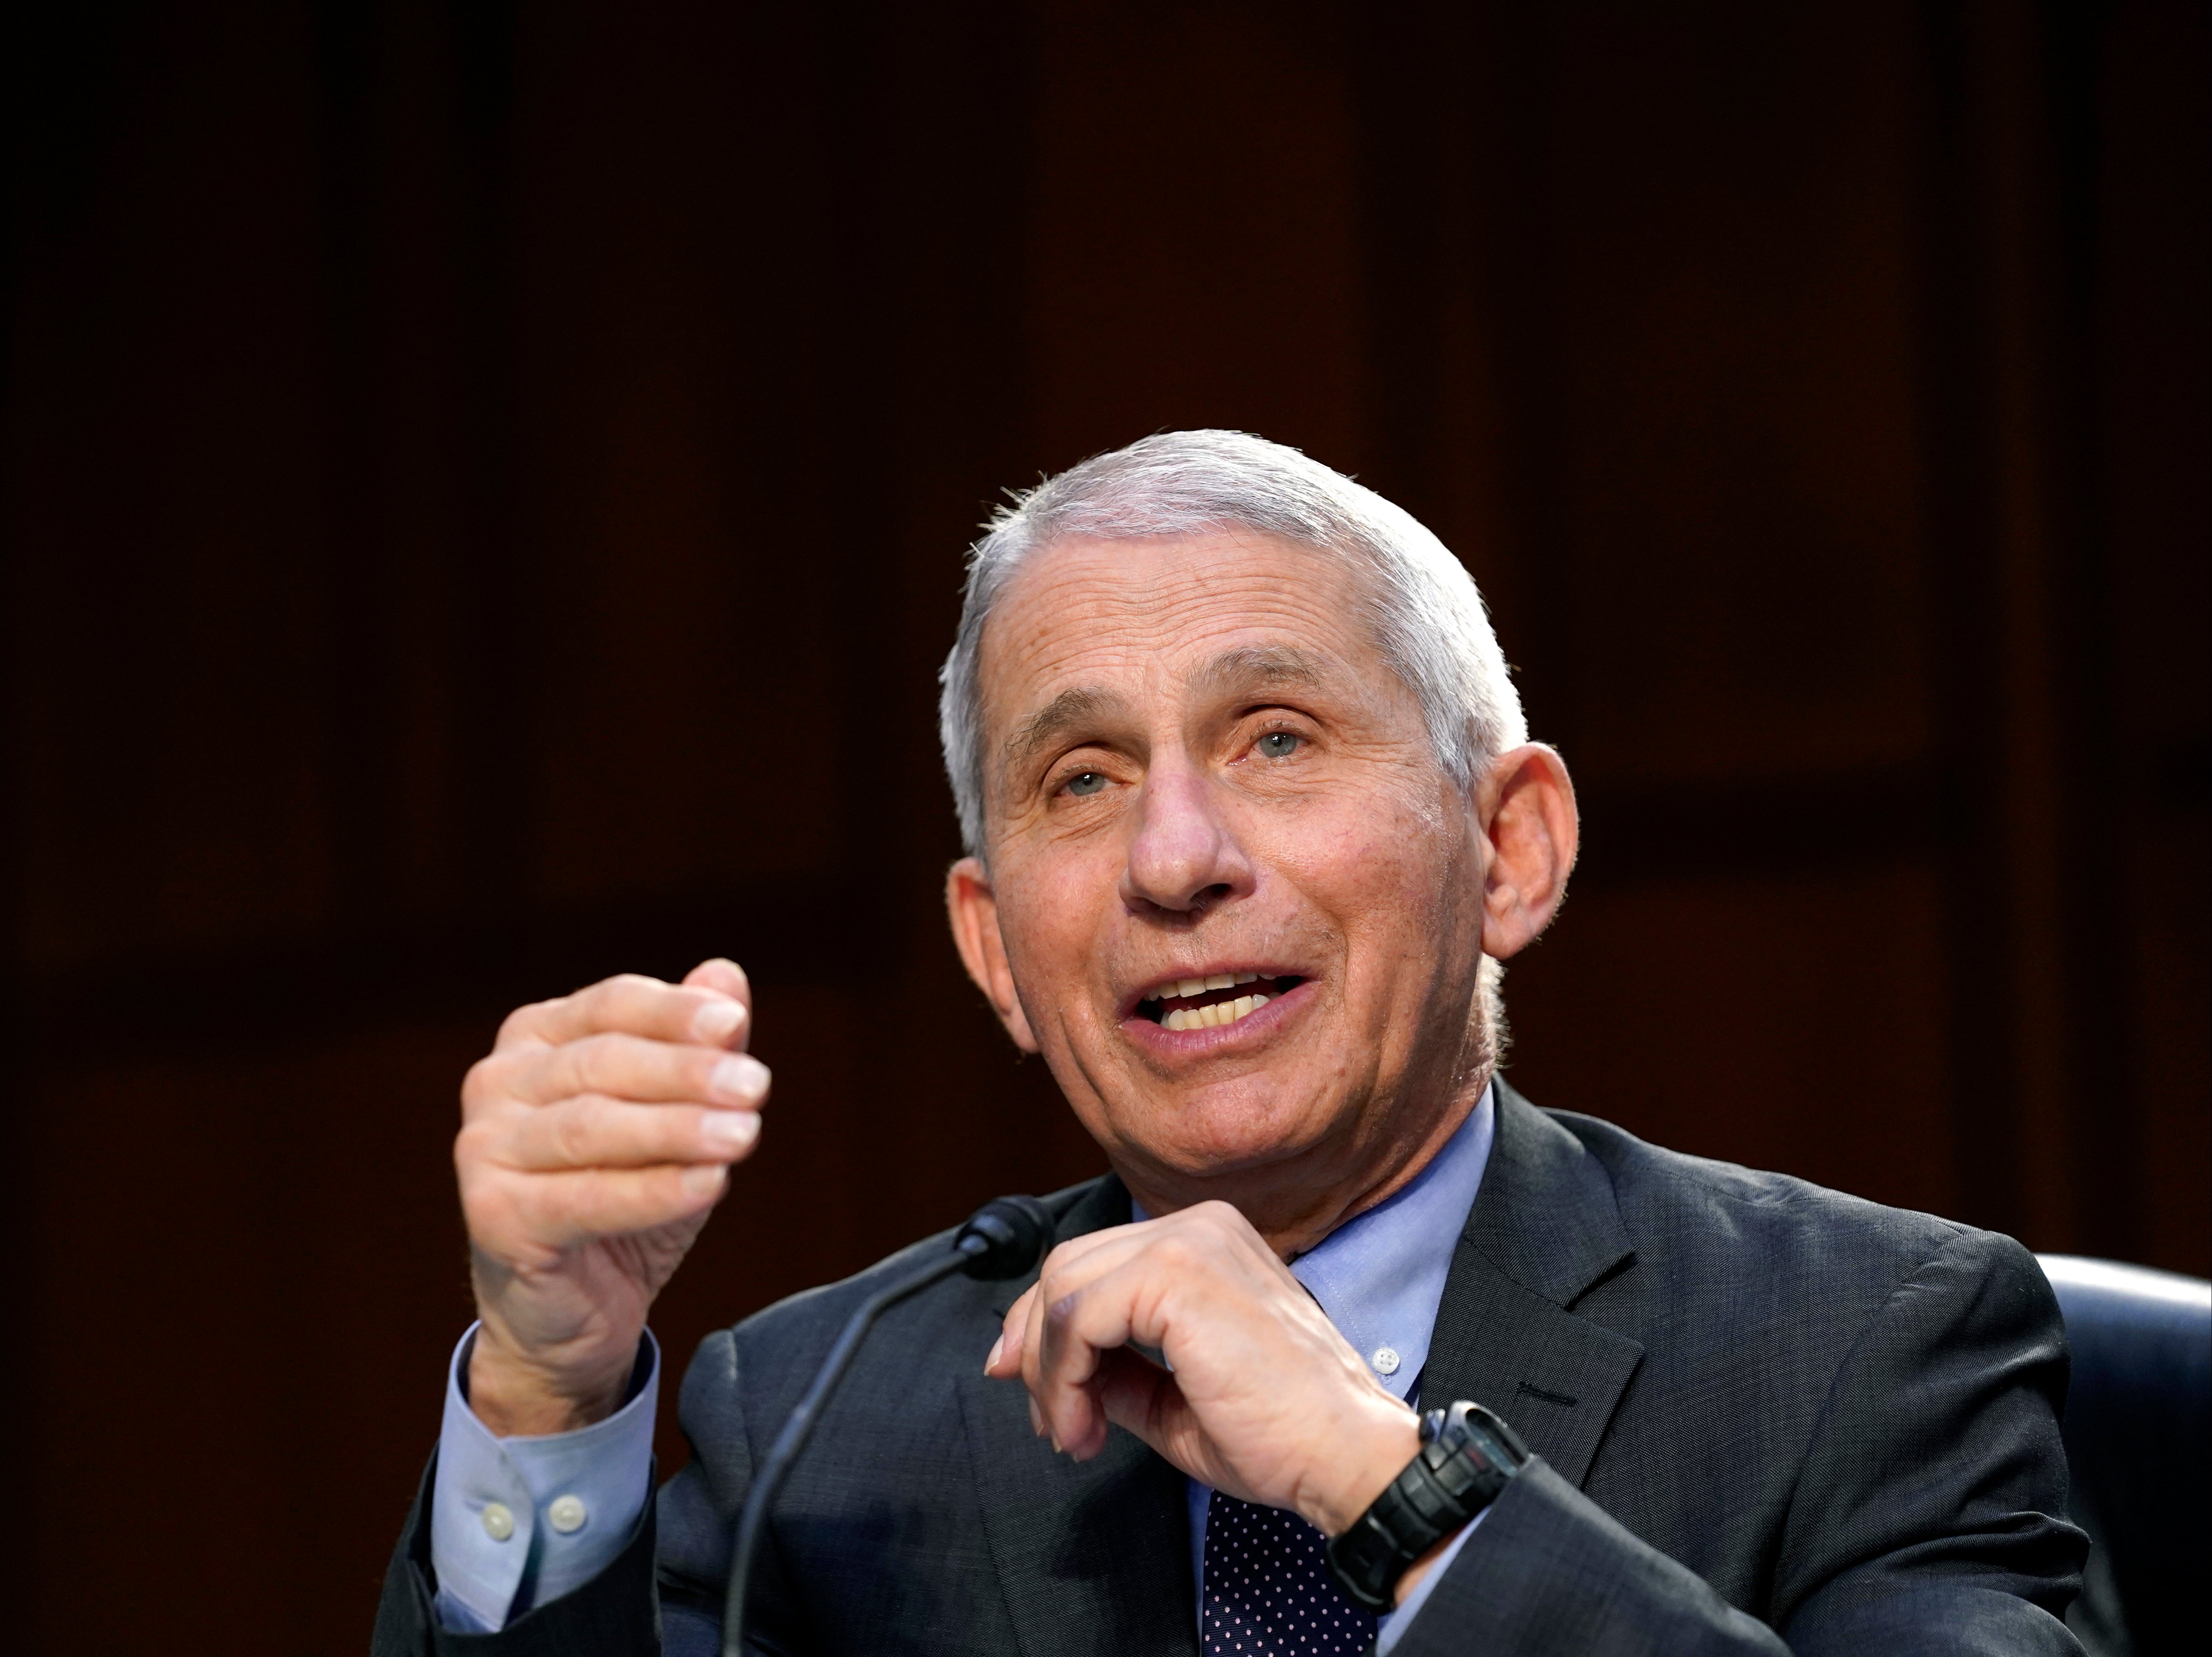 Dr Anthony Fauci, director of the National Institute of Allergy and Infectious Diseases, testifies during a Senate Health, Education, Labor and Pensions Committee